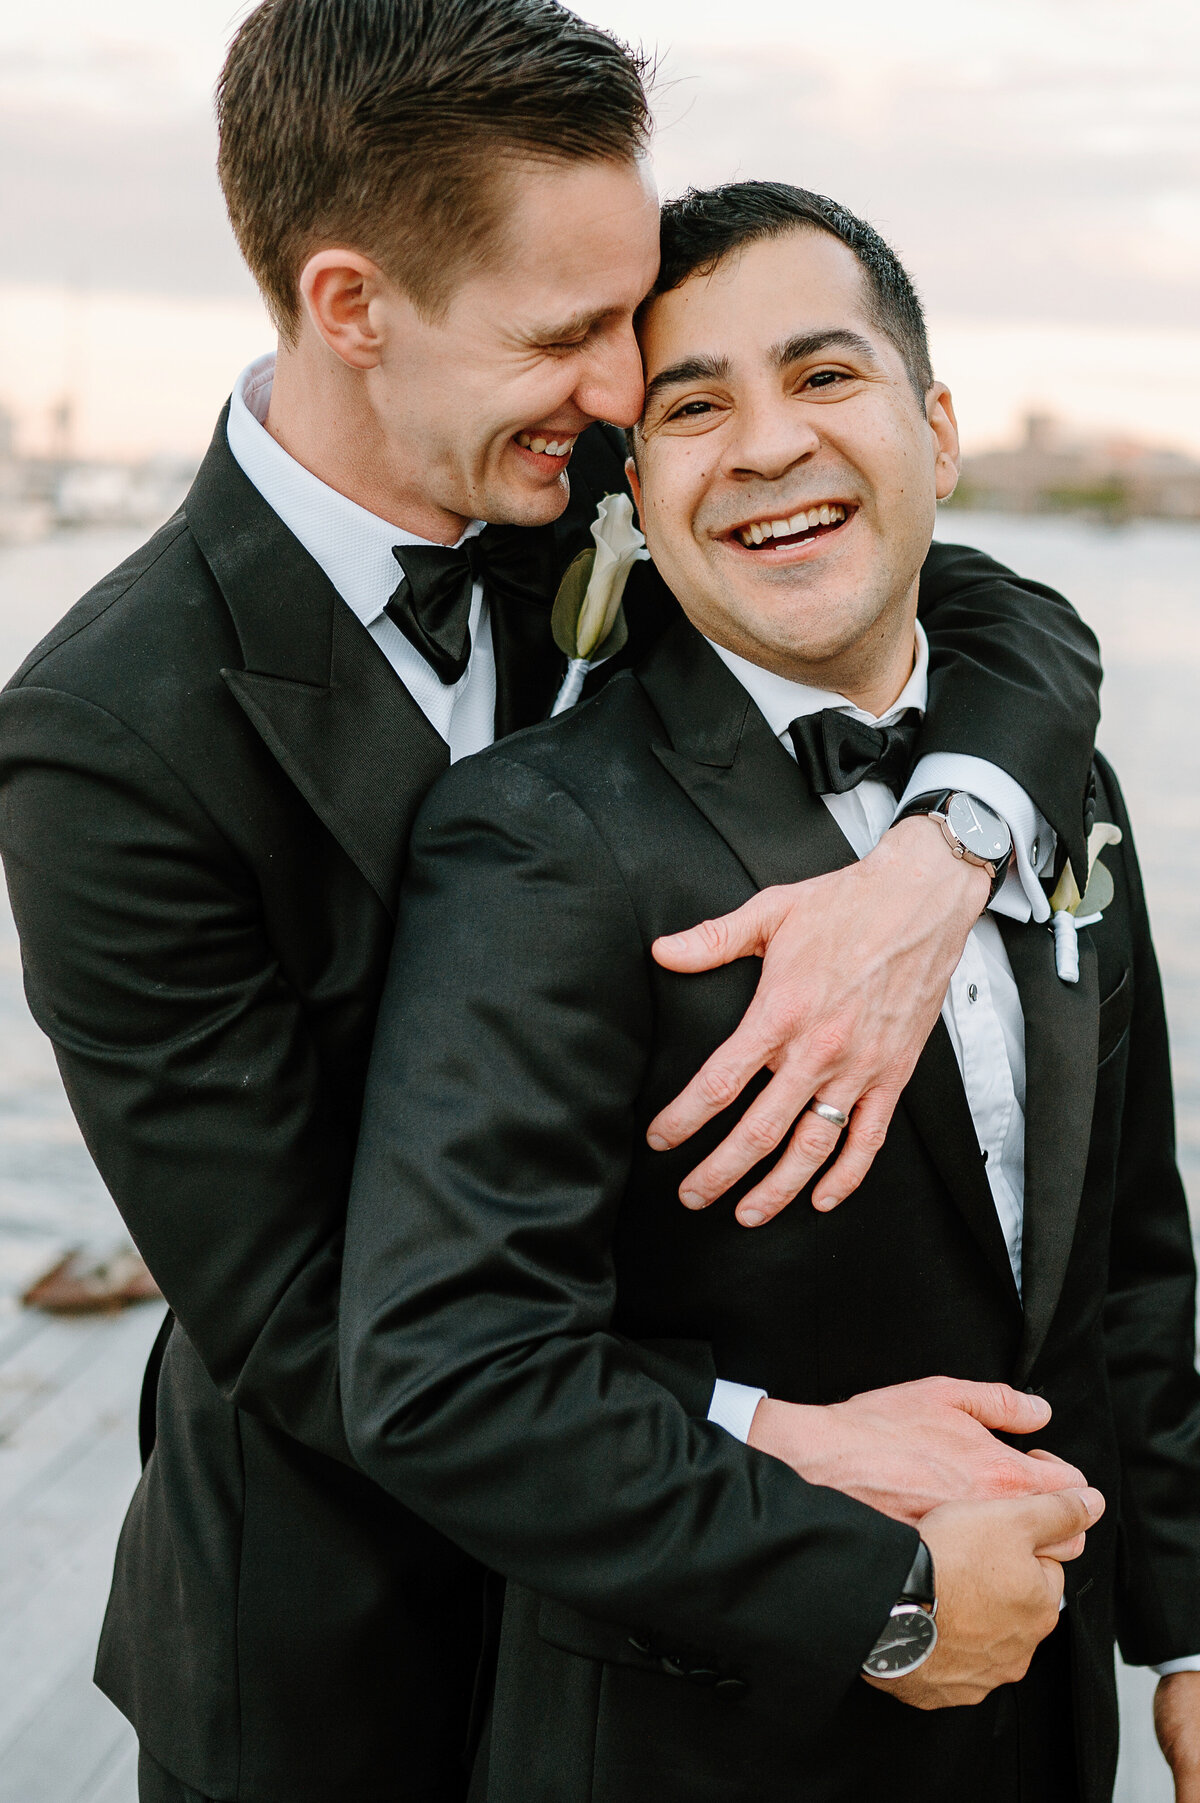 Grooms embracing with joy